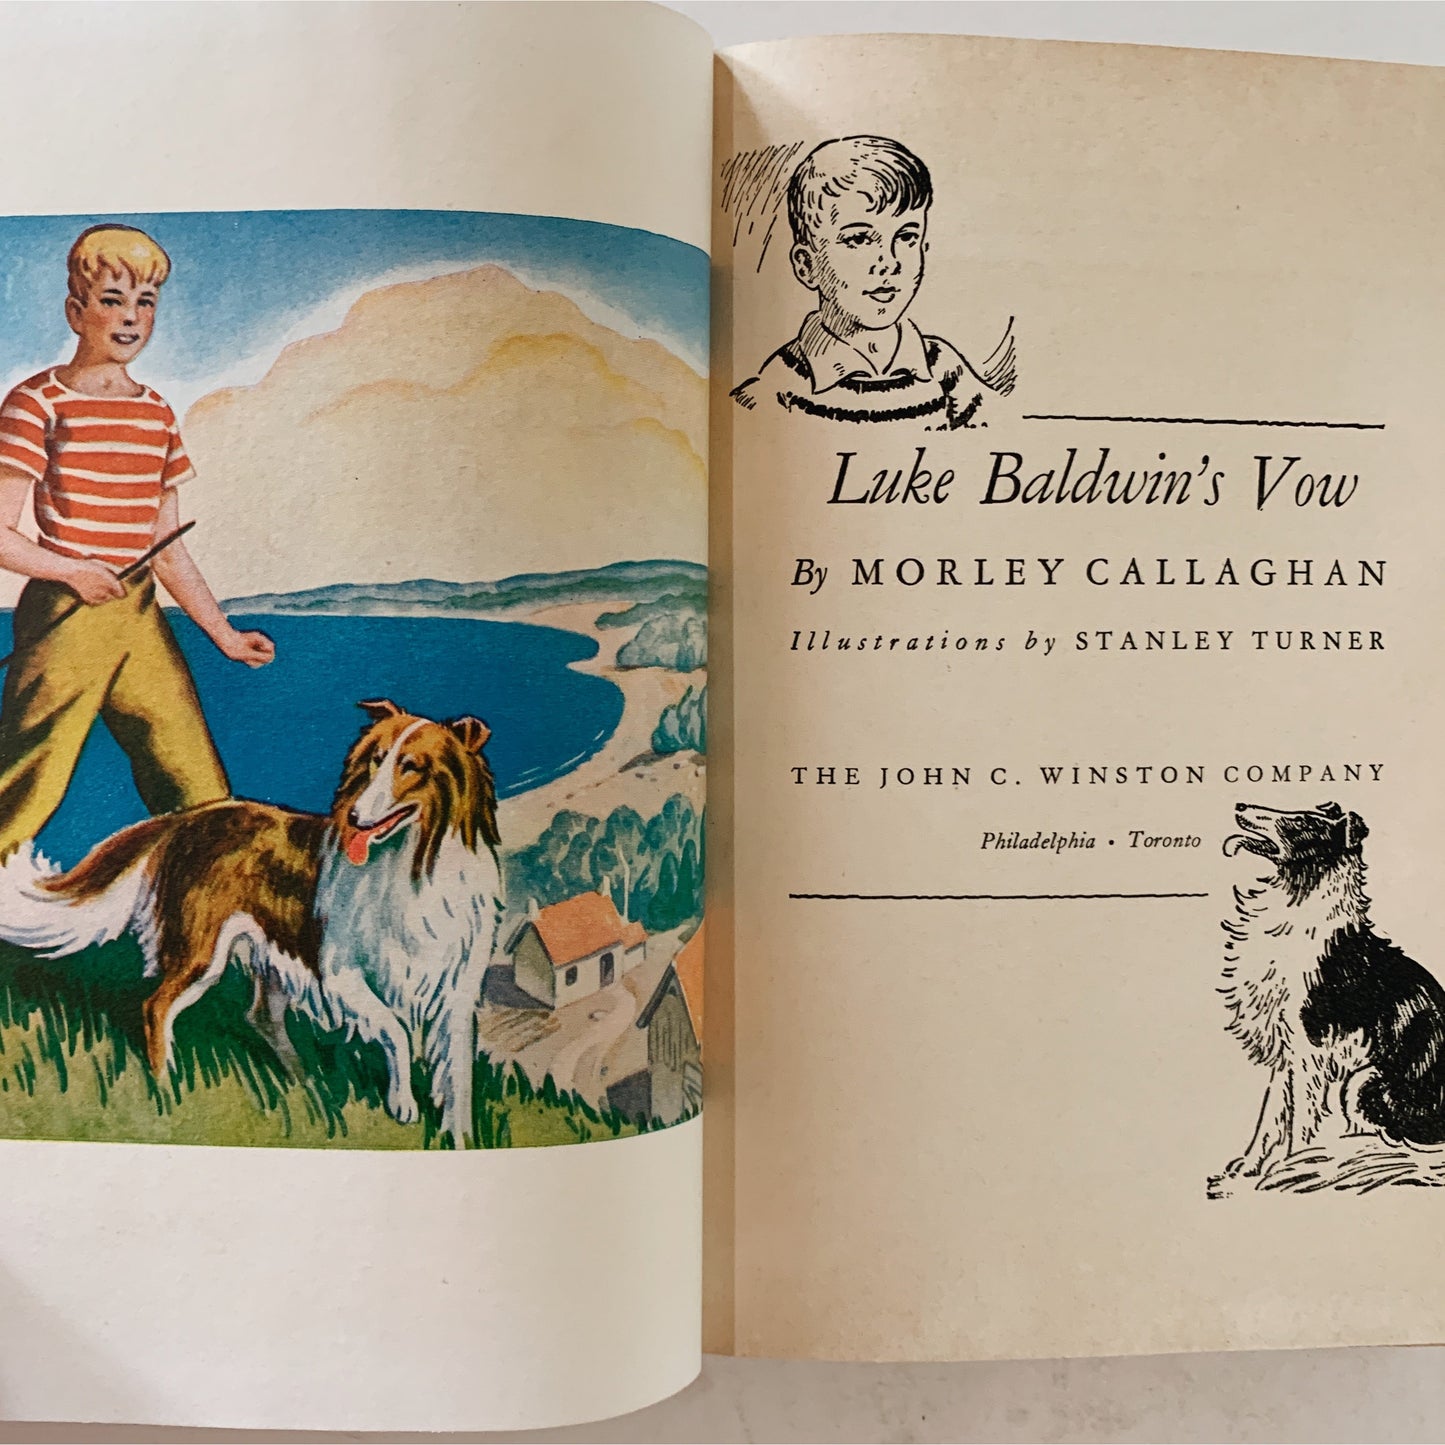 Luke Baldwin's Vow - A Story of a Boy and a Dog, Morley Callaghan, 1948, First Edition